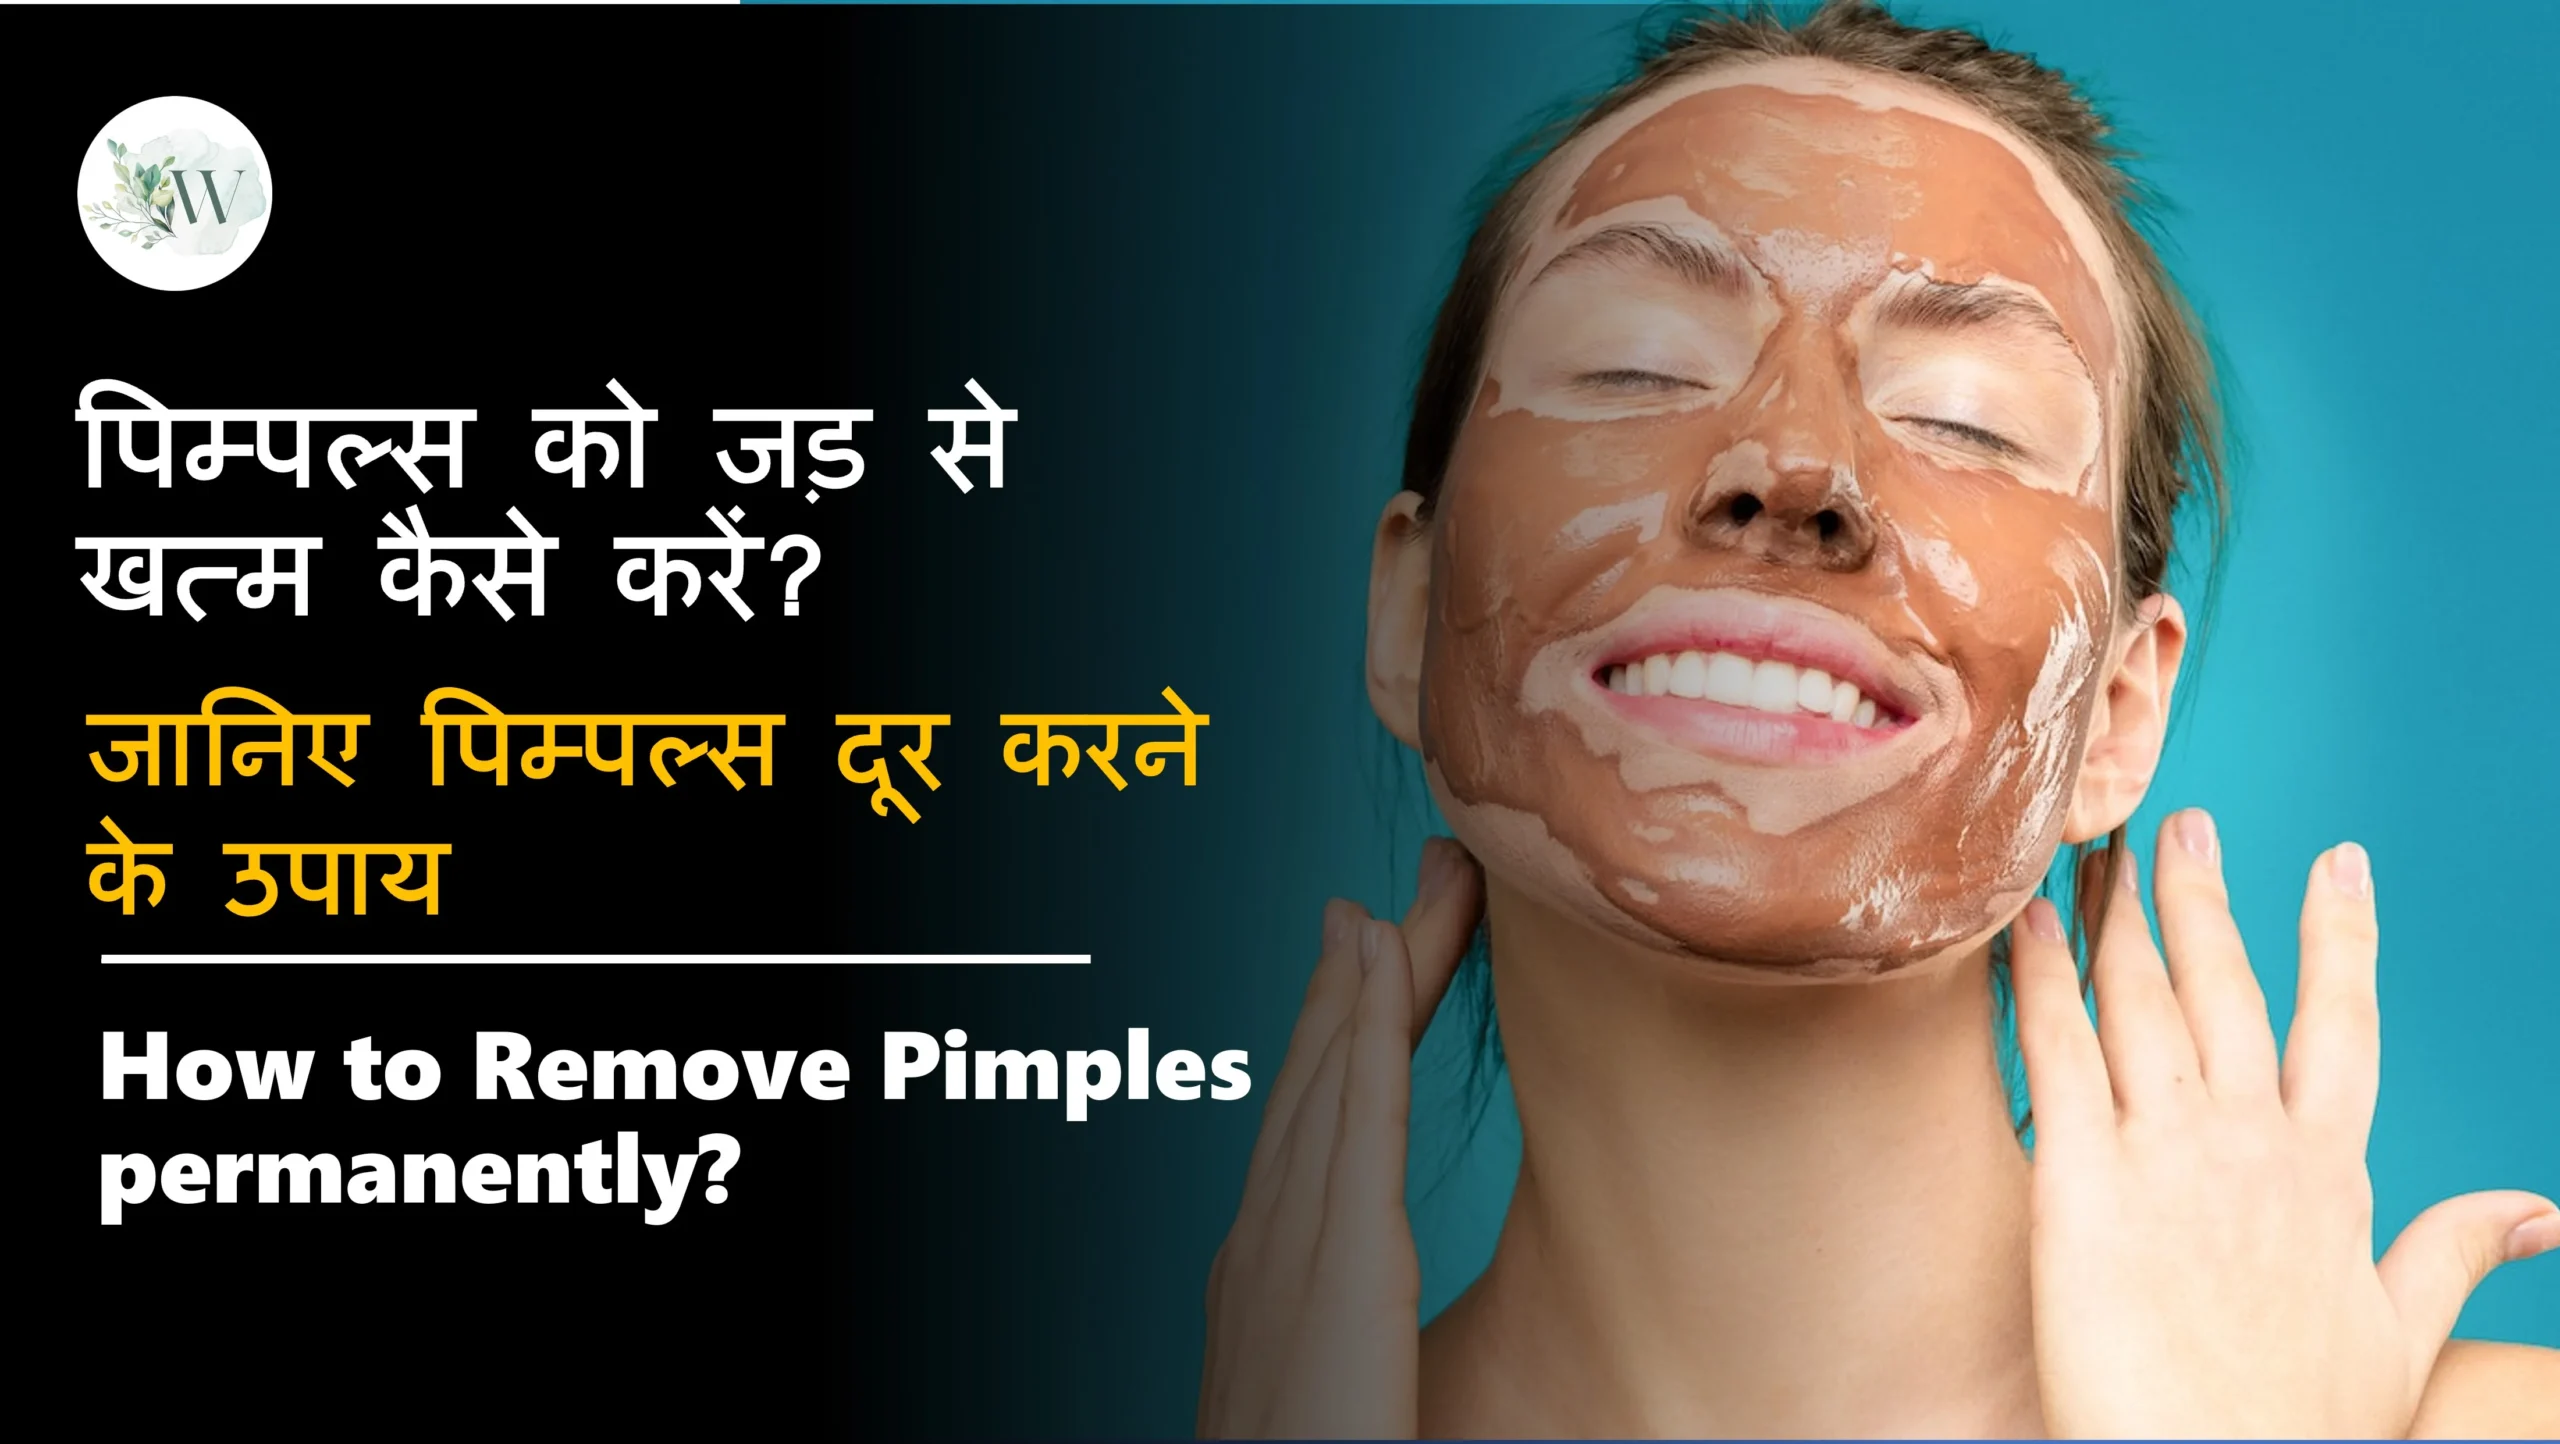 How to Remove Pimples permanently in hindi